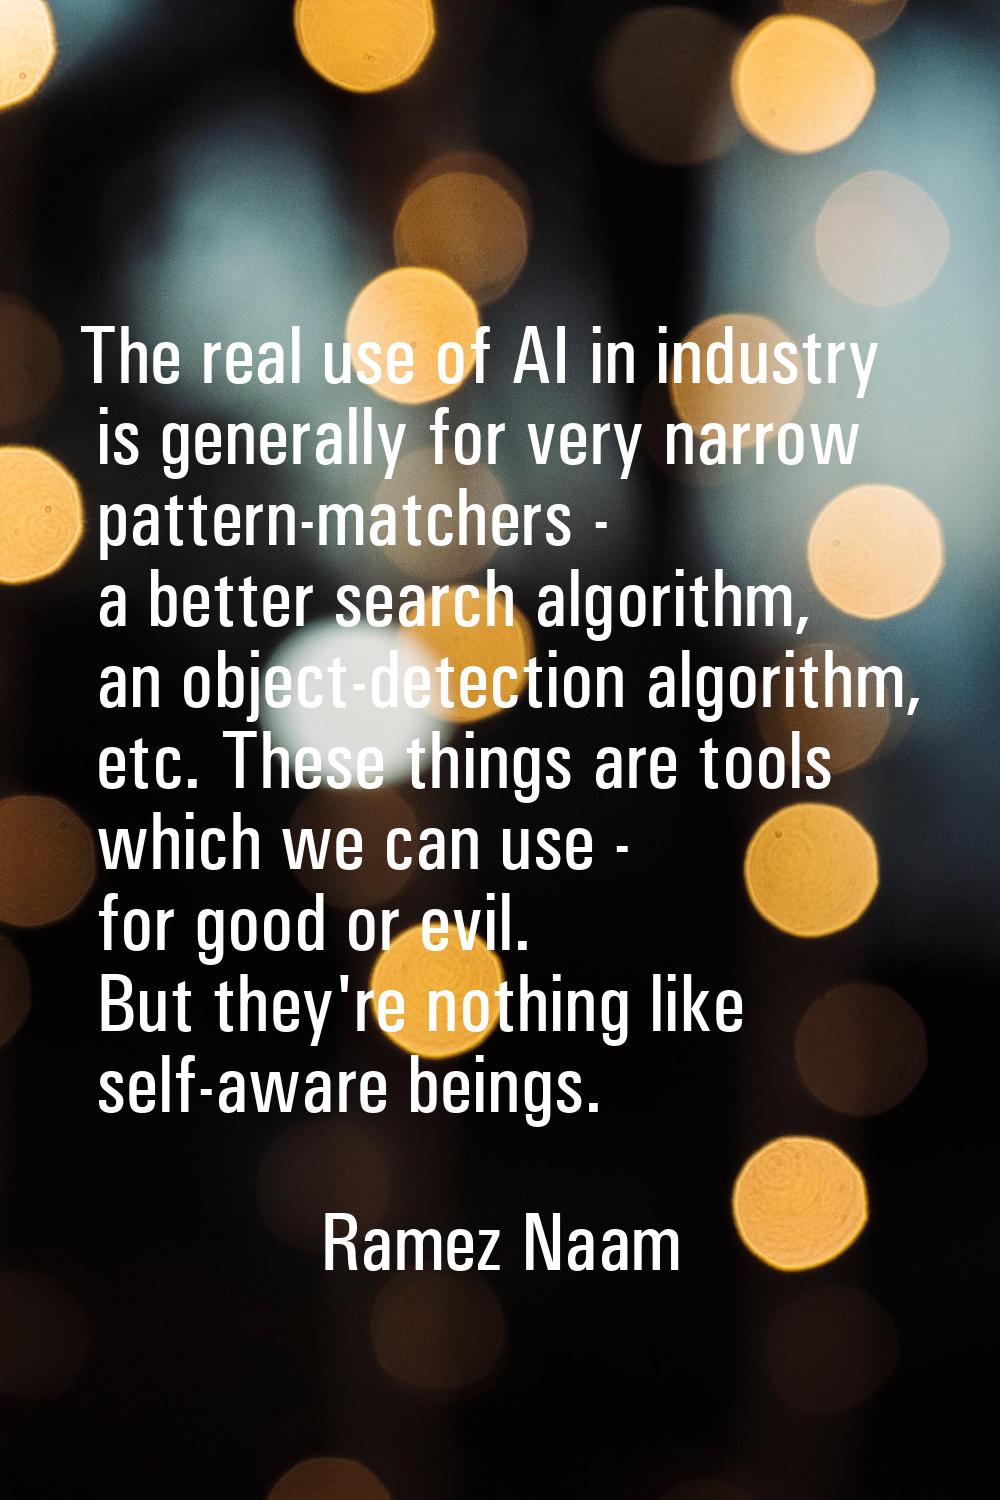 The real use of AI in industry is generally for very narrow pattern-matchers - a better search algo